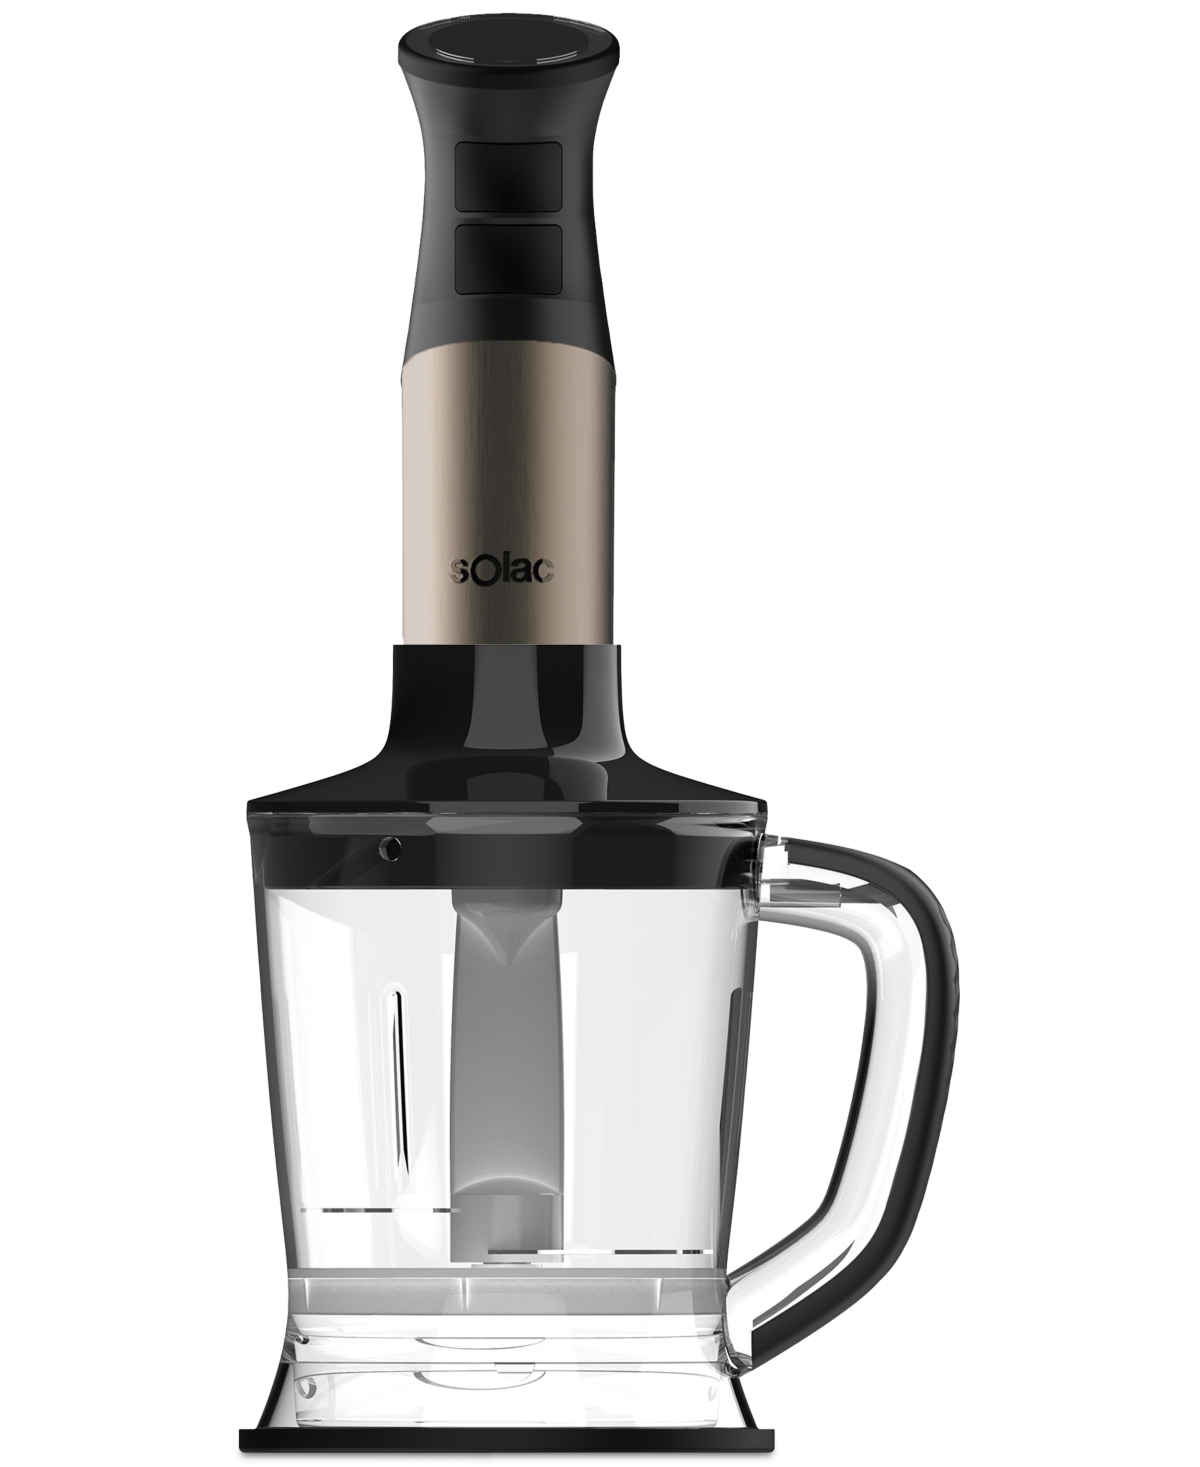 Solac Professional Stainless Steel 1000w Hand Blender In Dark Brushed Stainless-steel